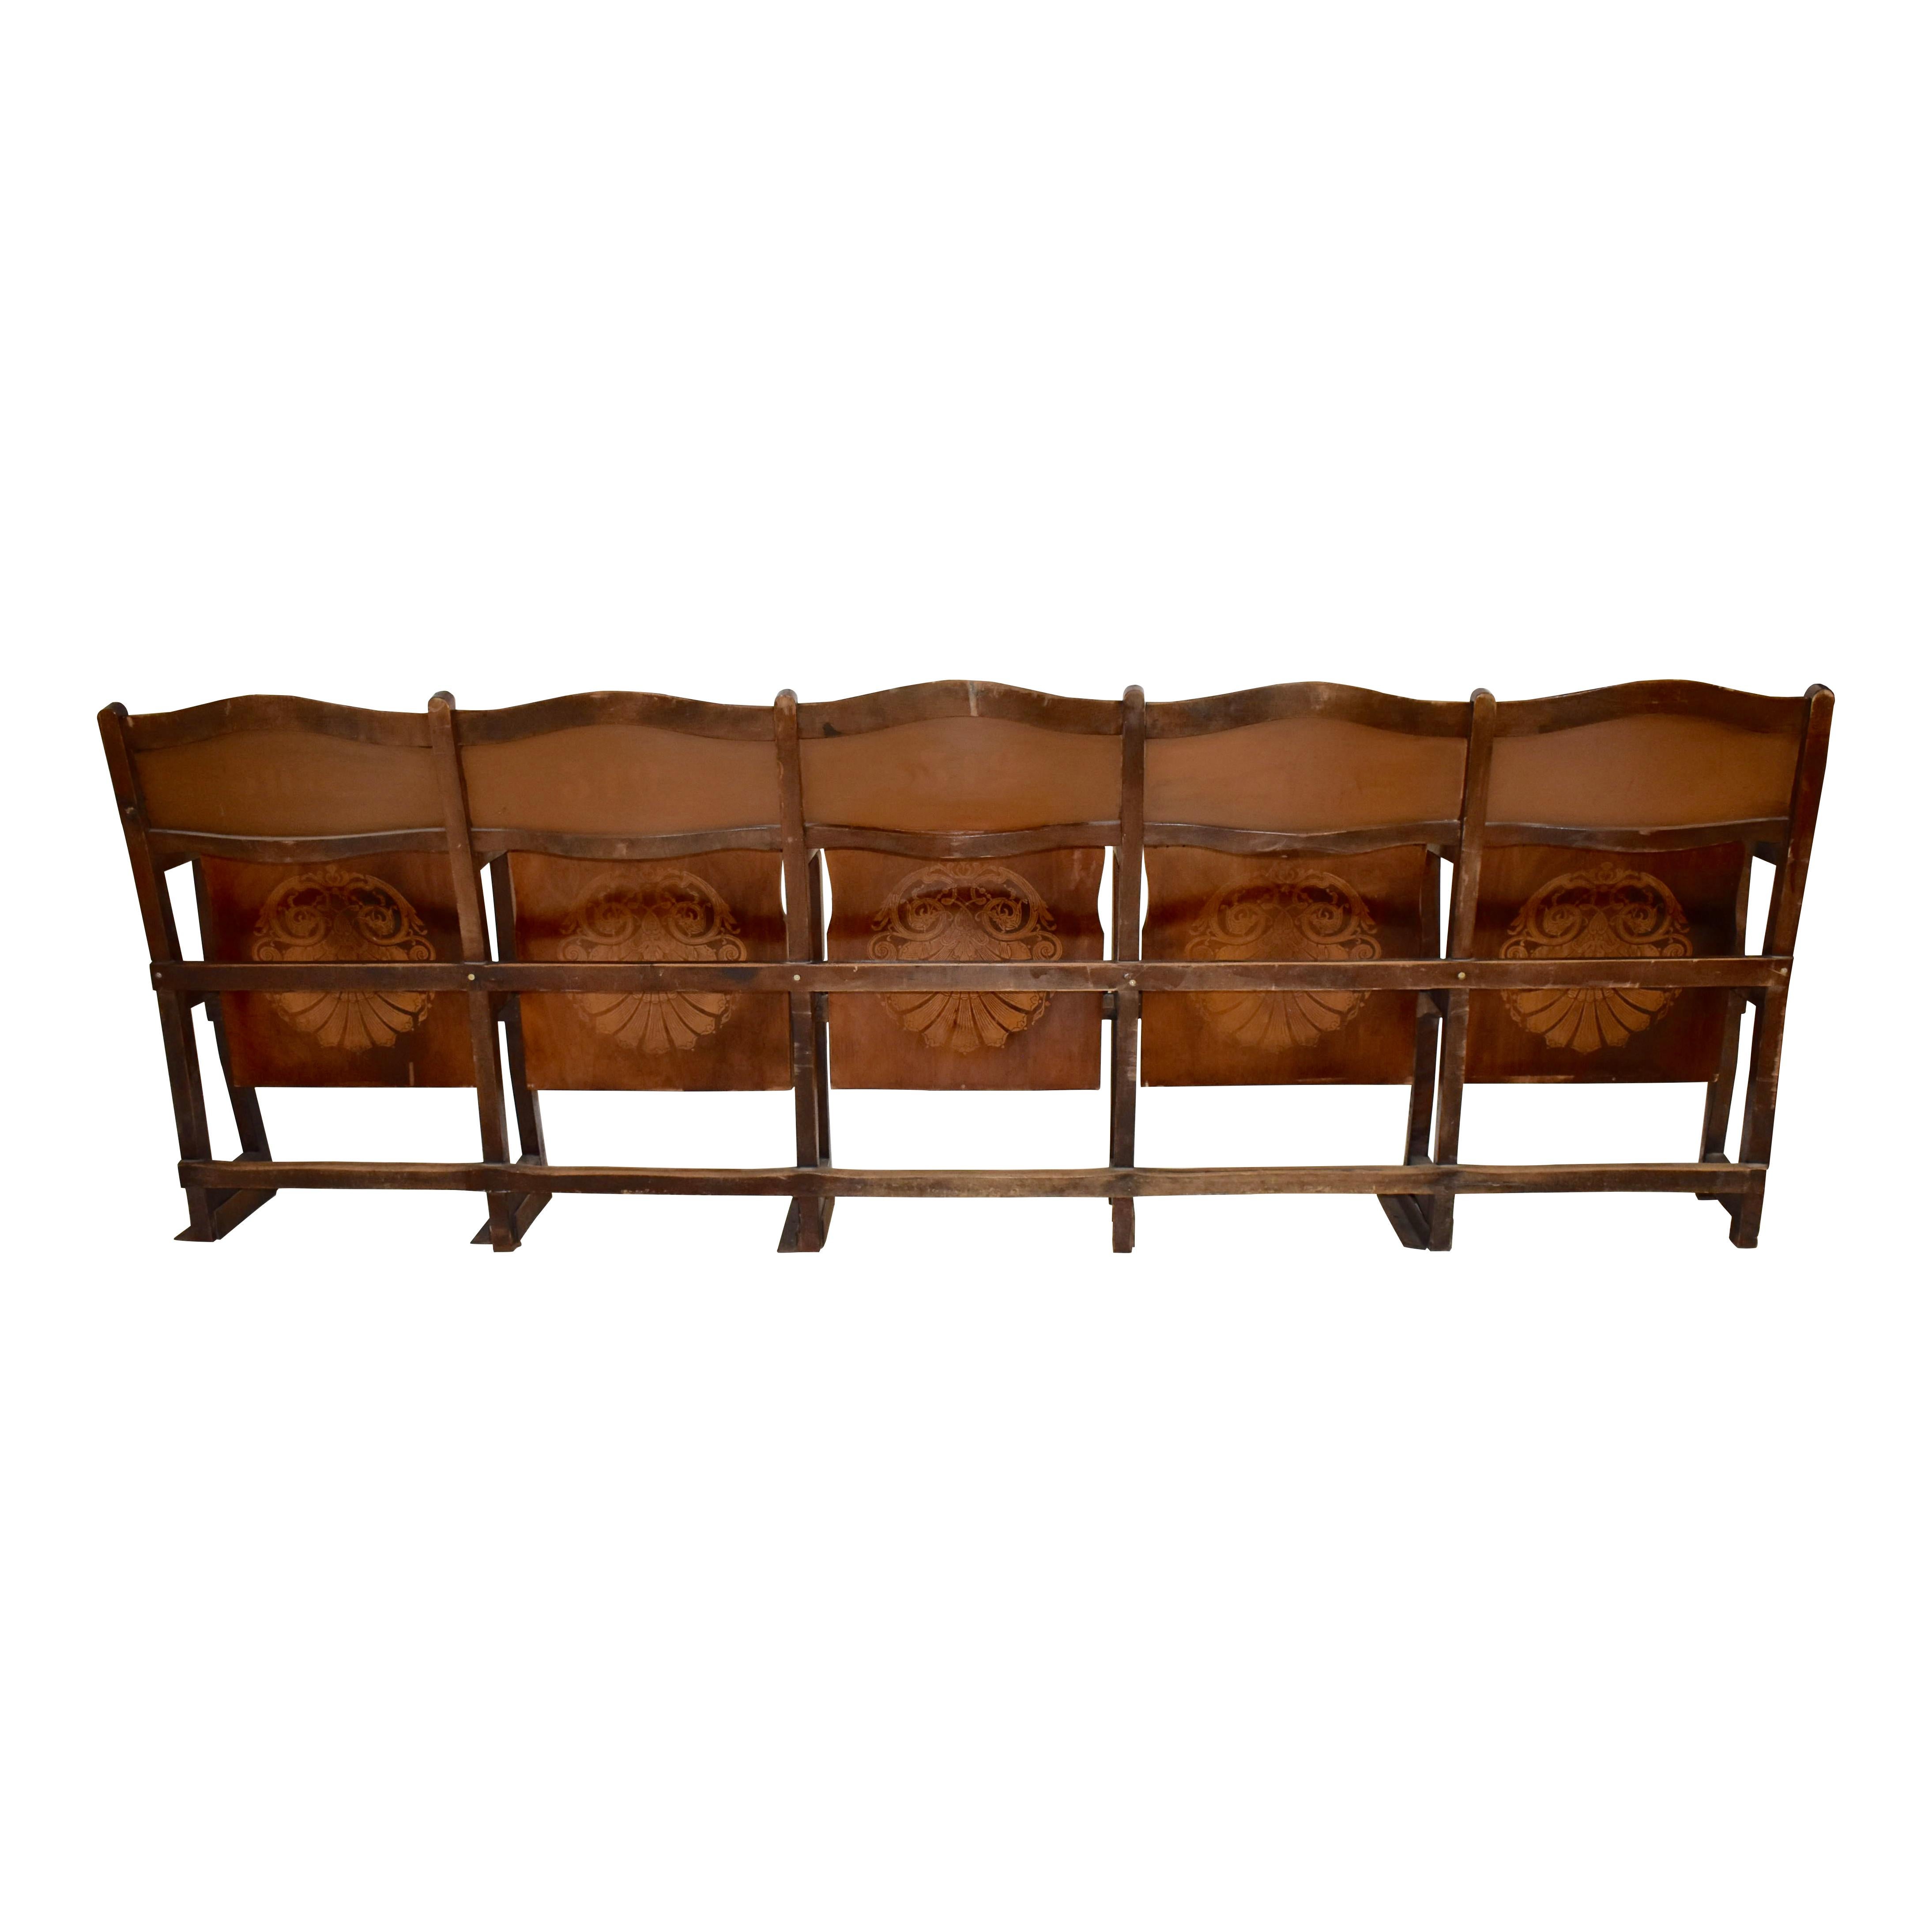 Art Nouveau Theatre Seats Row of Five Chairs, circa 1910 In Good Condition For Sale In Evergreen, CO